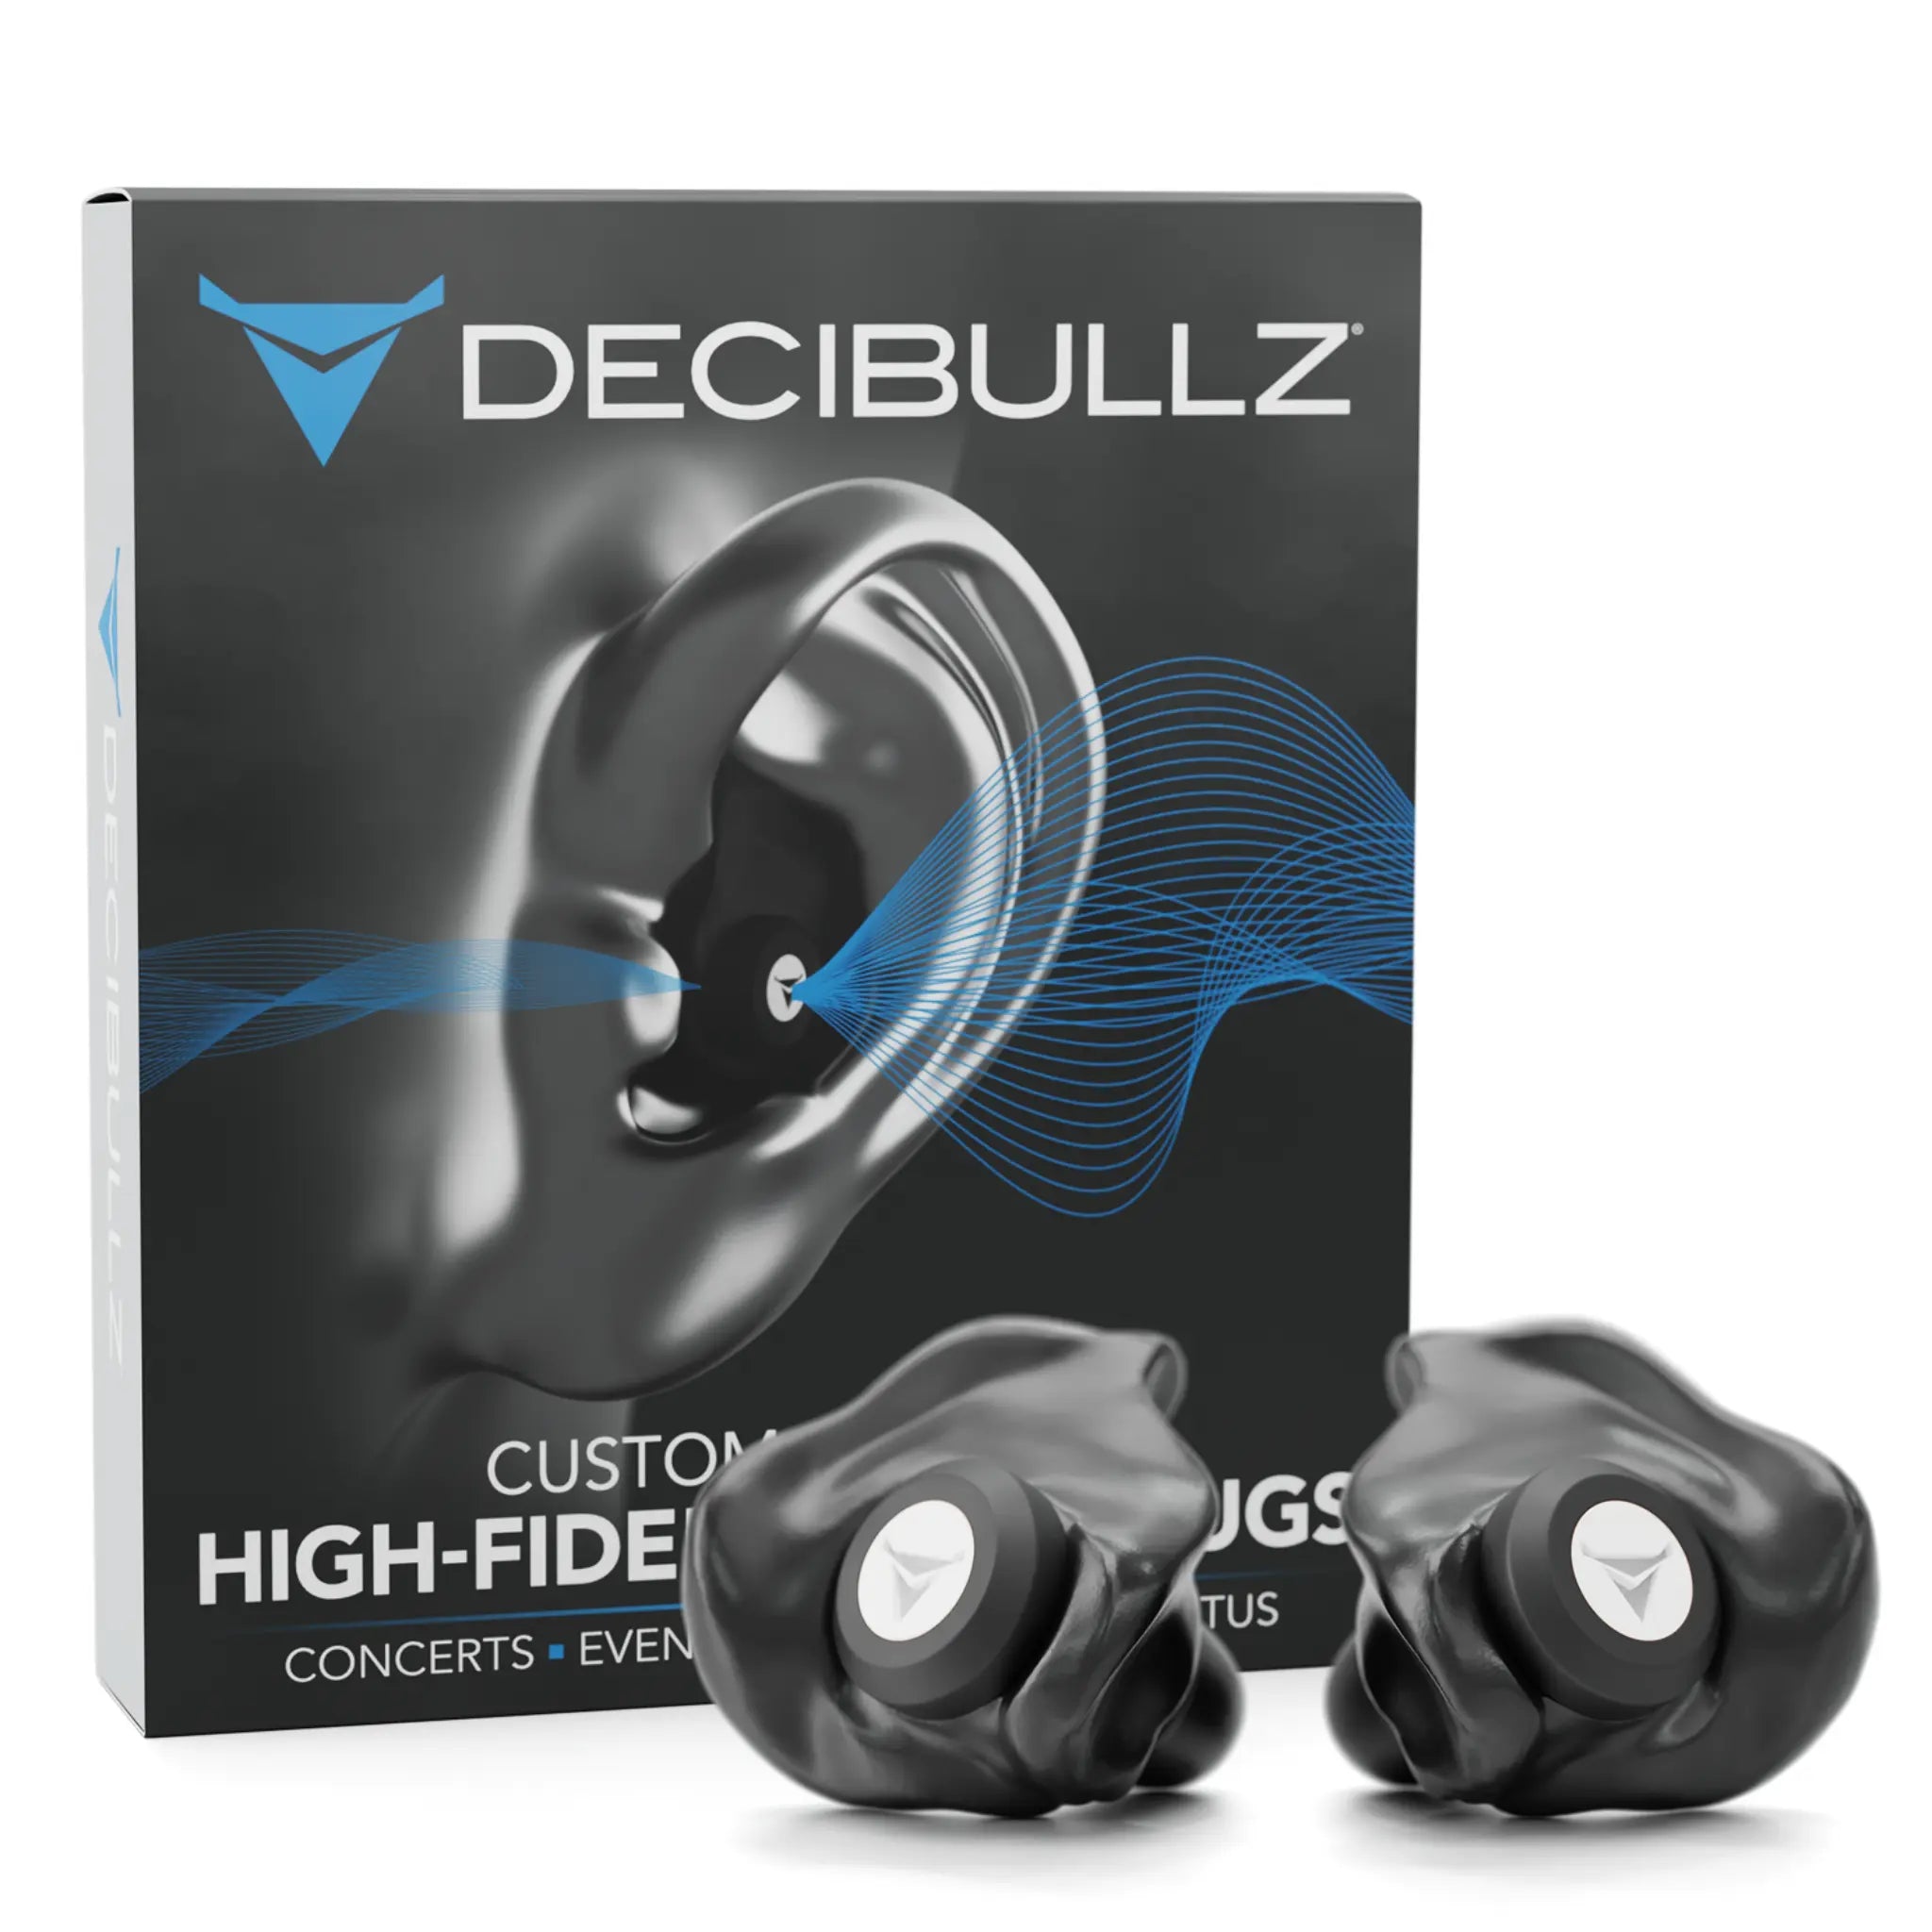 These earplugs are great for people who are sensitive to sound